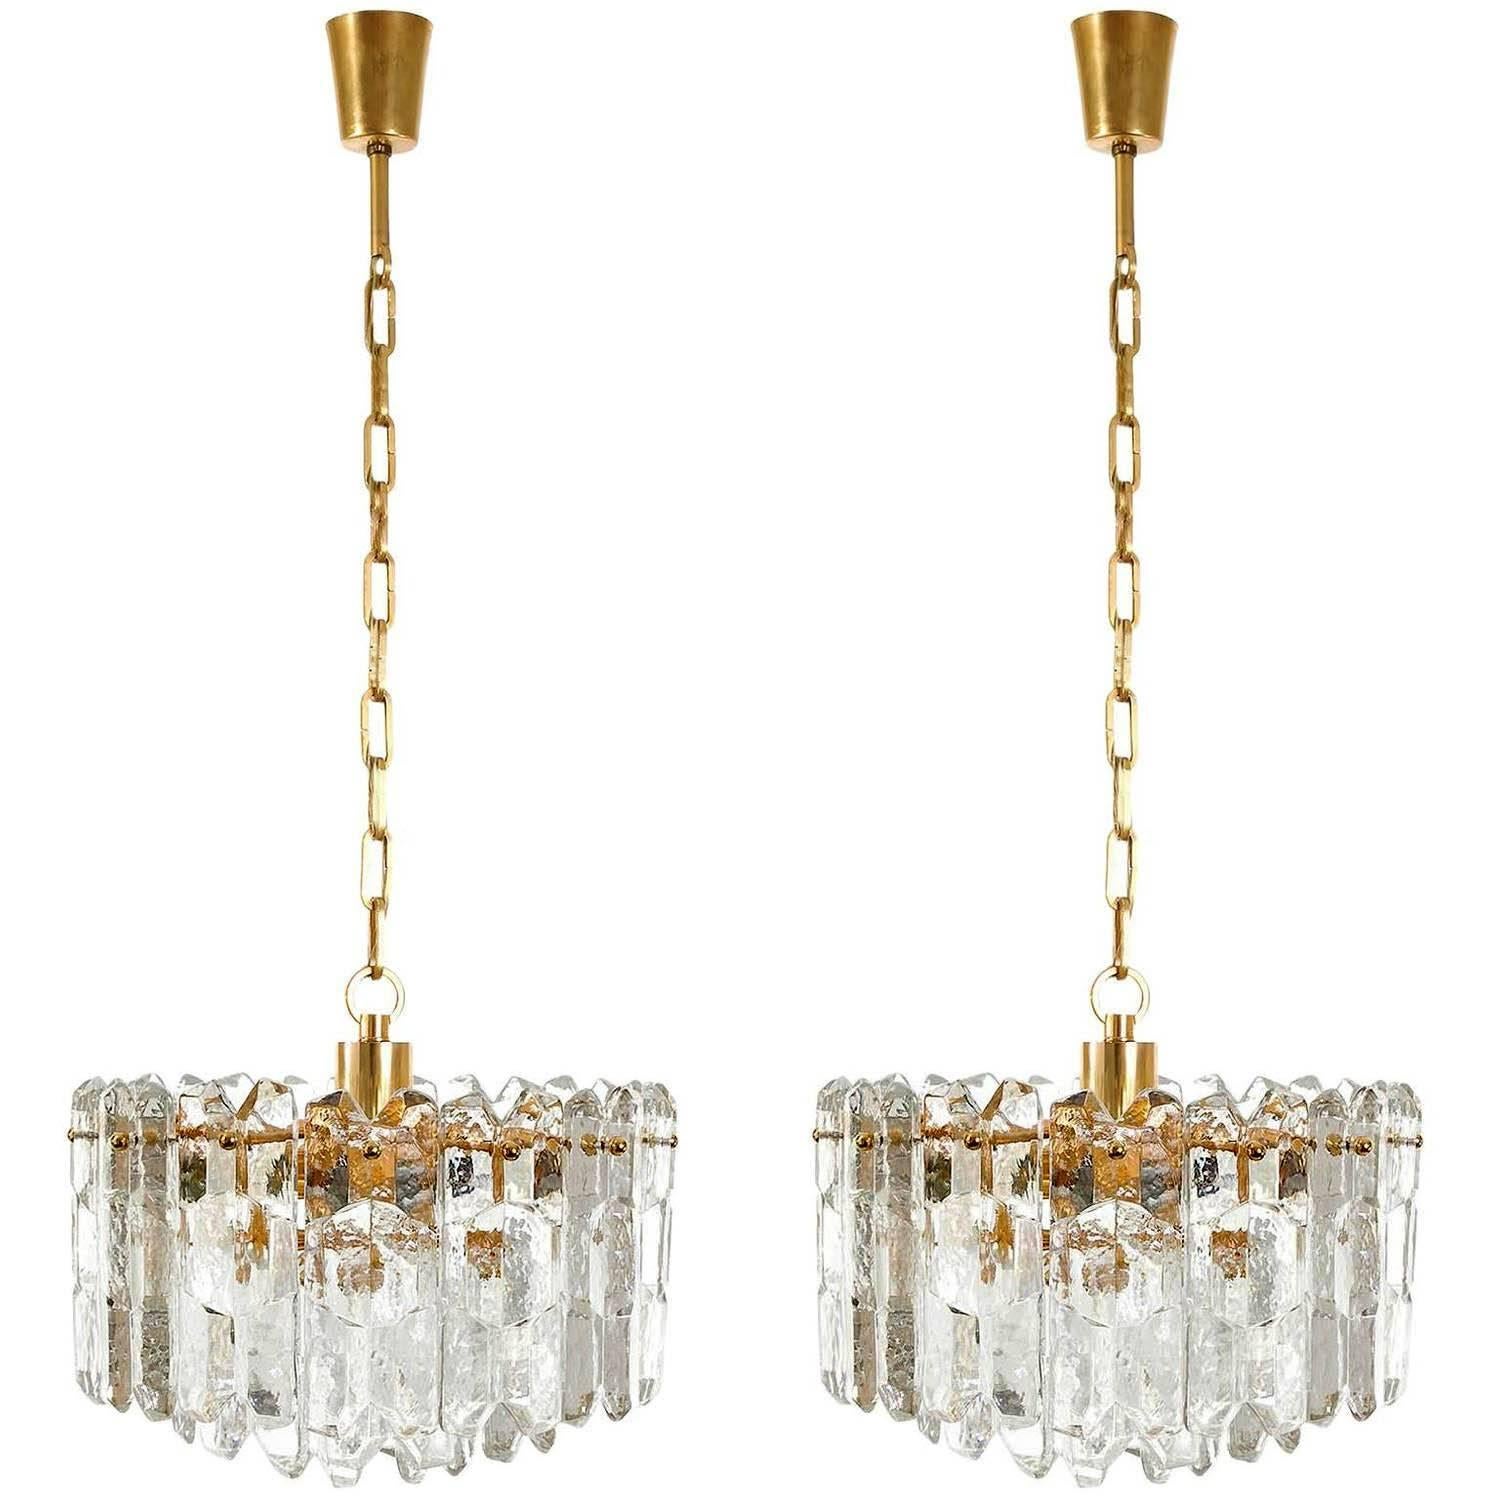 One of three very exquisit 24-carat gold-plated brass and clear brillant glass hollywood regency light fixtures model 'Palazzo' by J.T. Kalmar, Vienna, Austria, manufactured in midcentury, circa 1970 (late 1960s or early 1970s). The lamps are marked